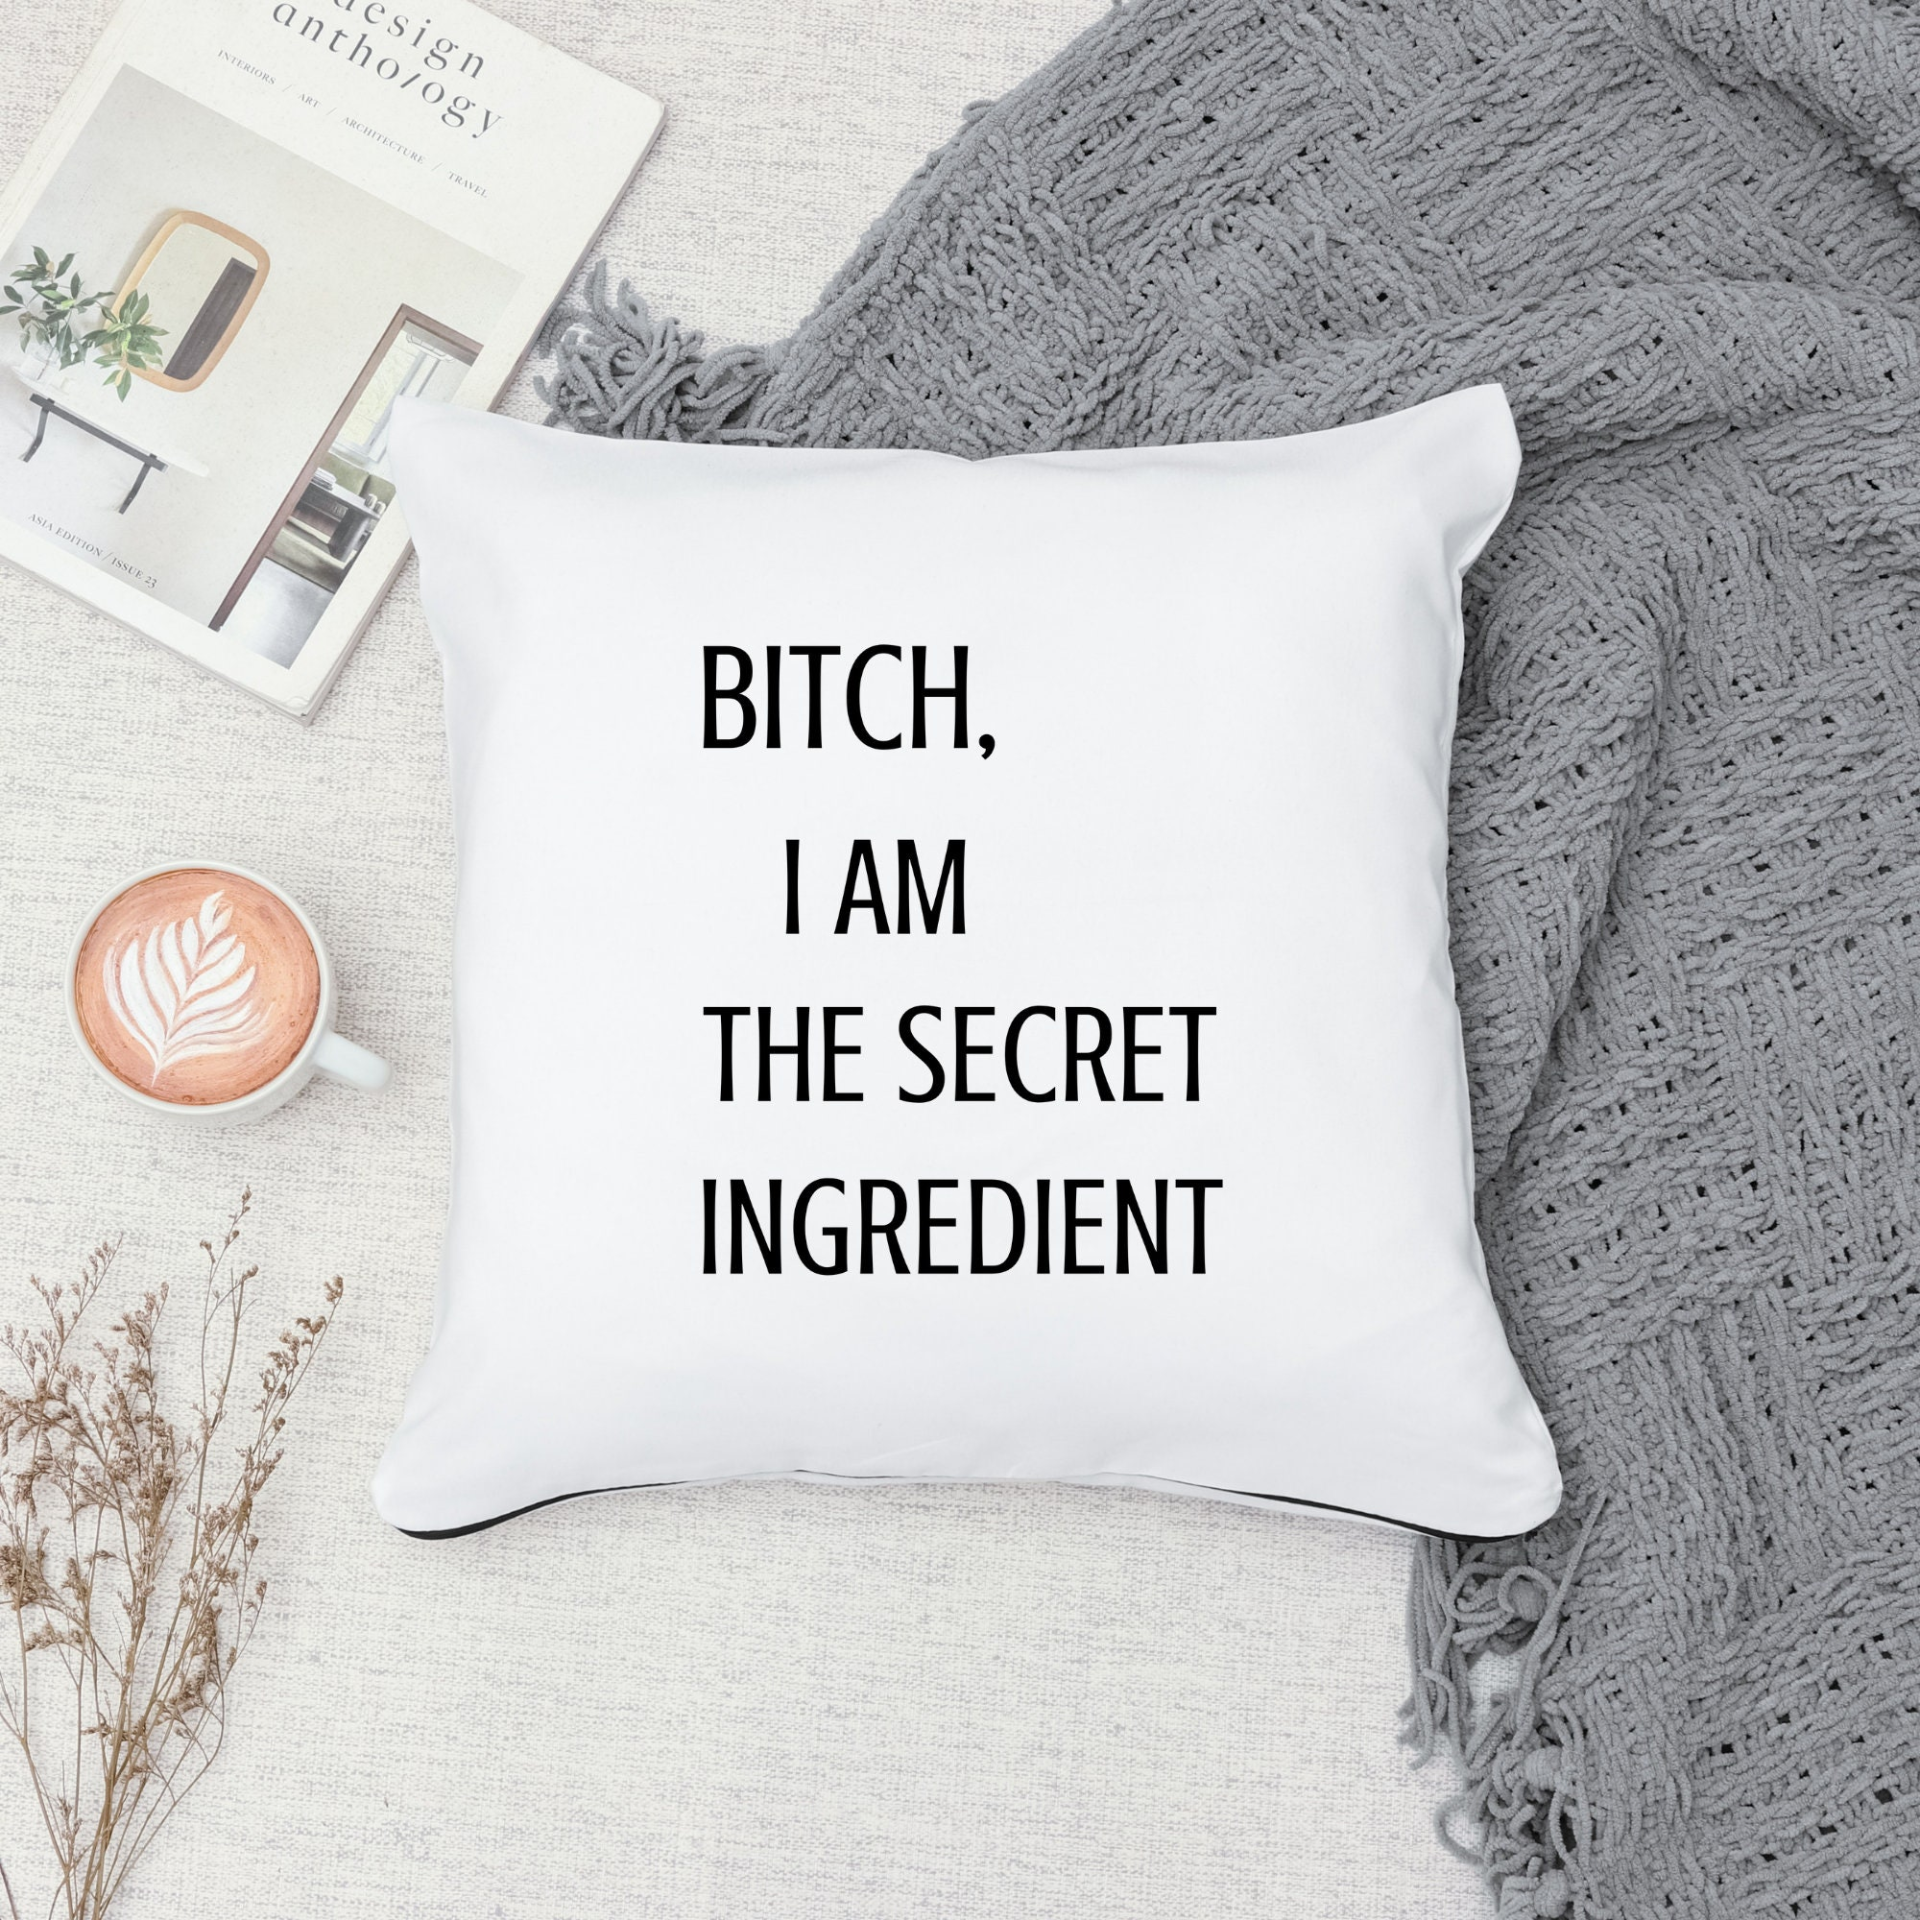 Funny Sarcastic Accent Pillow Cover with Quote, Couch Throw Pillowcase in Two Sizes Gift for Cook, Housewarming Gift Living Room or Bedroom